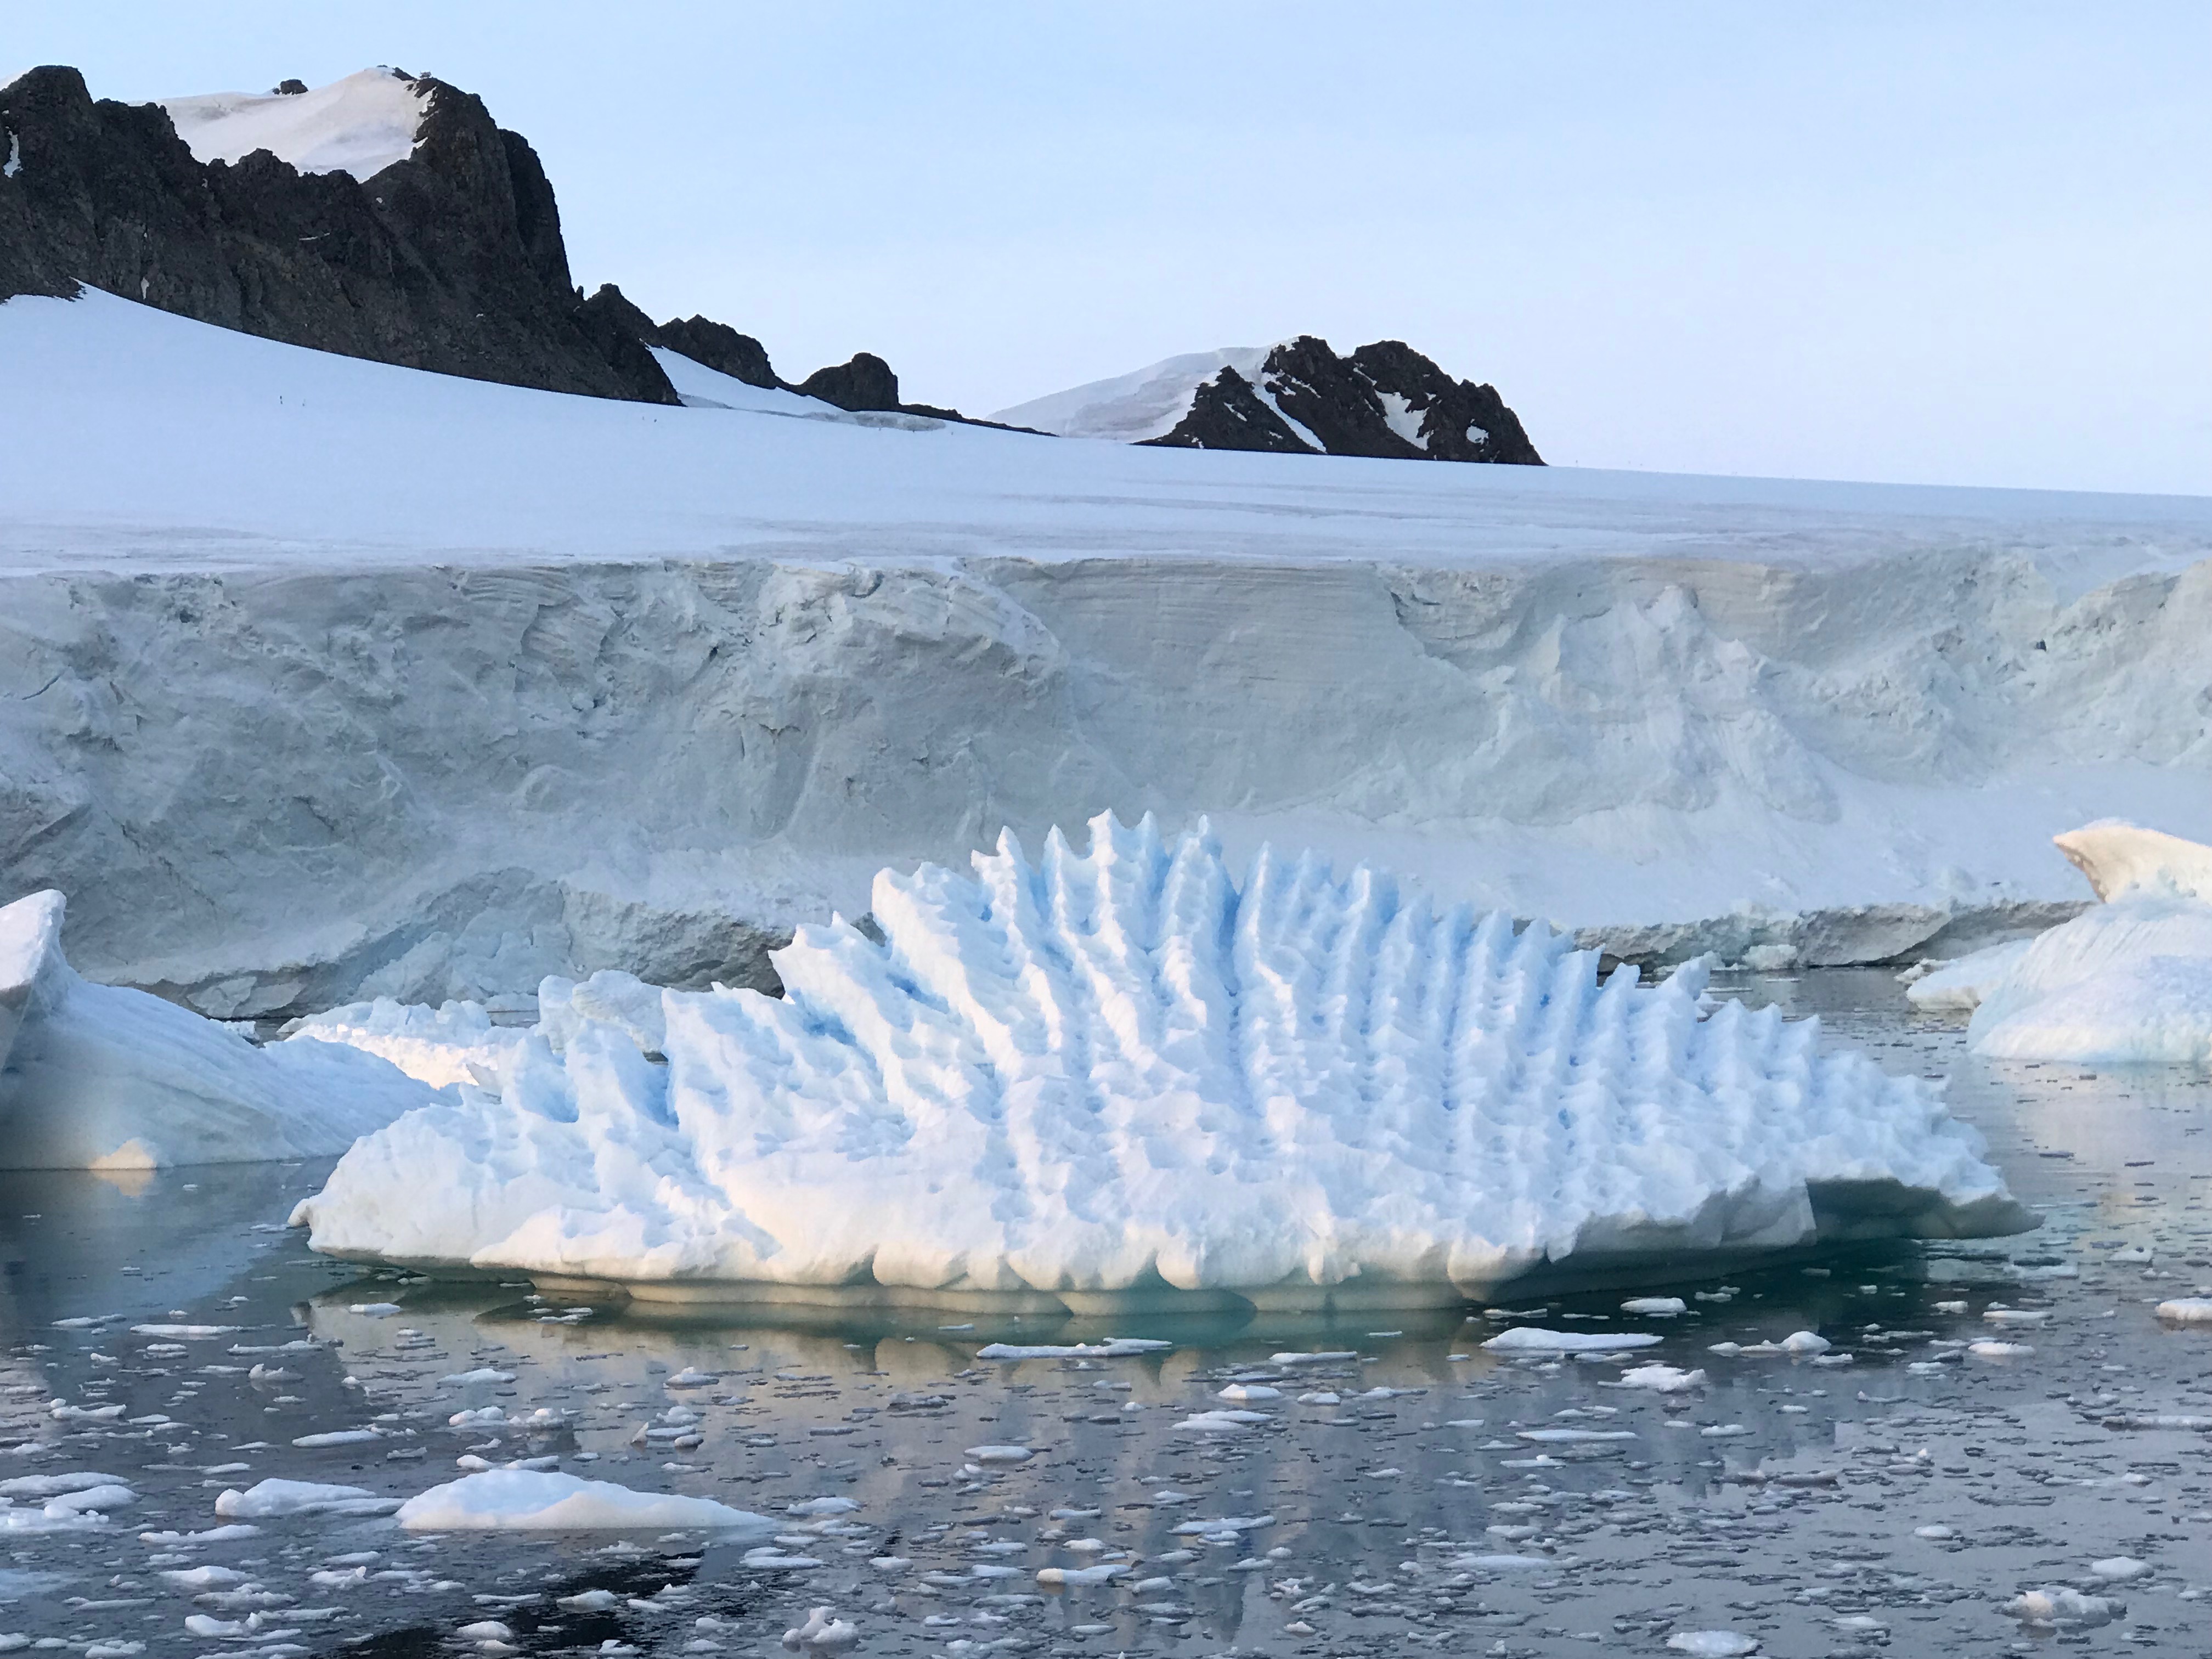 Ice floes floating in water in the Antarctic